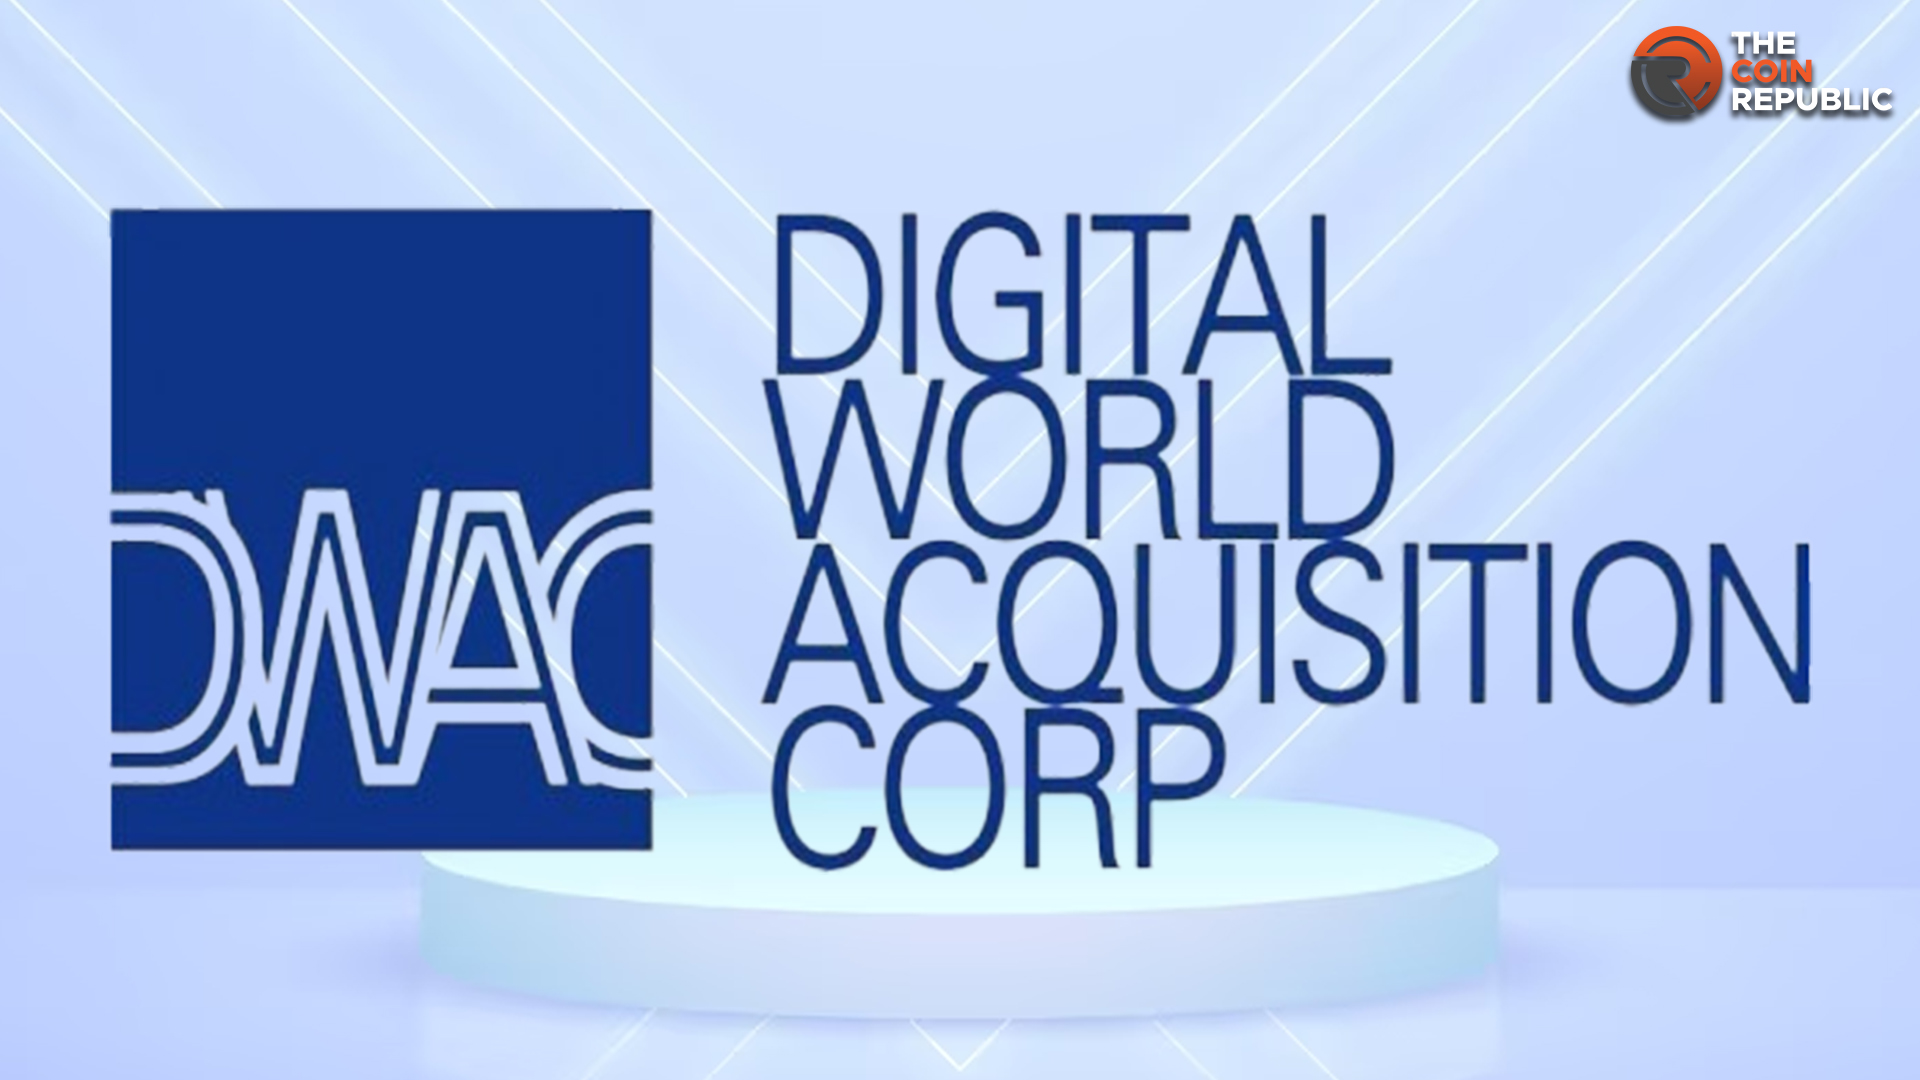 DWAC Stock Price Prediction: Can DWAC Break Above The Channel?